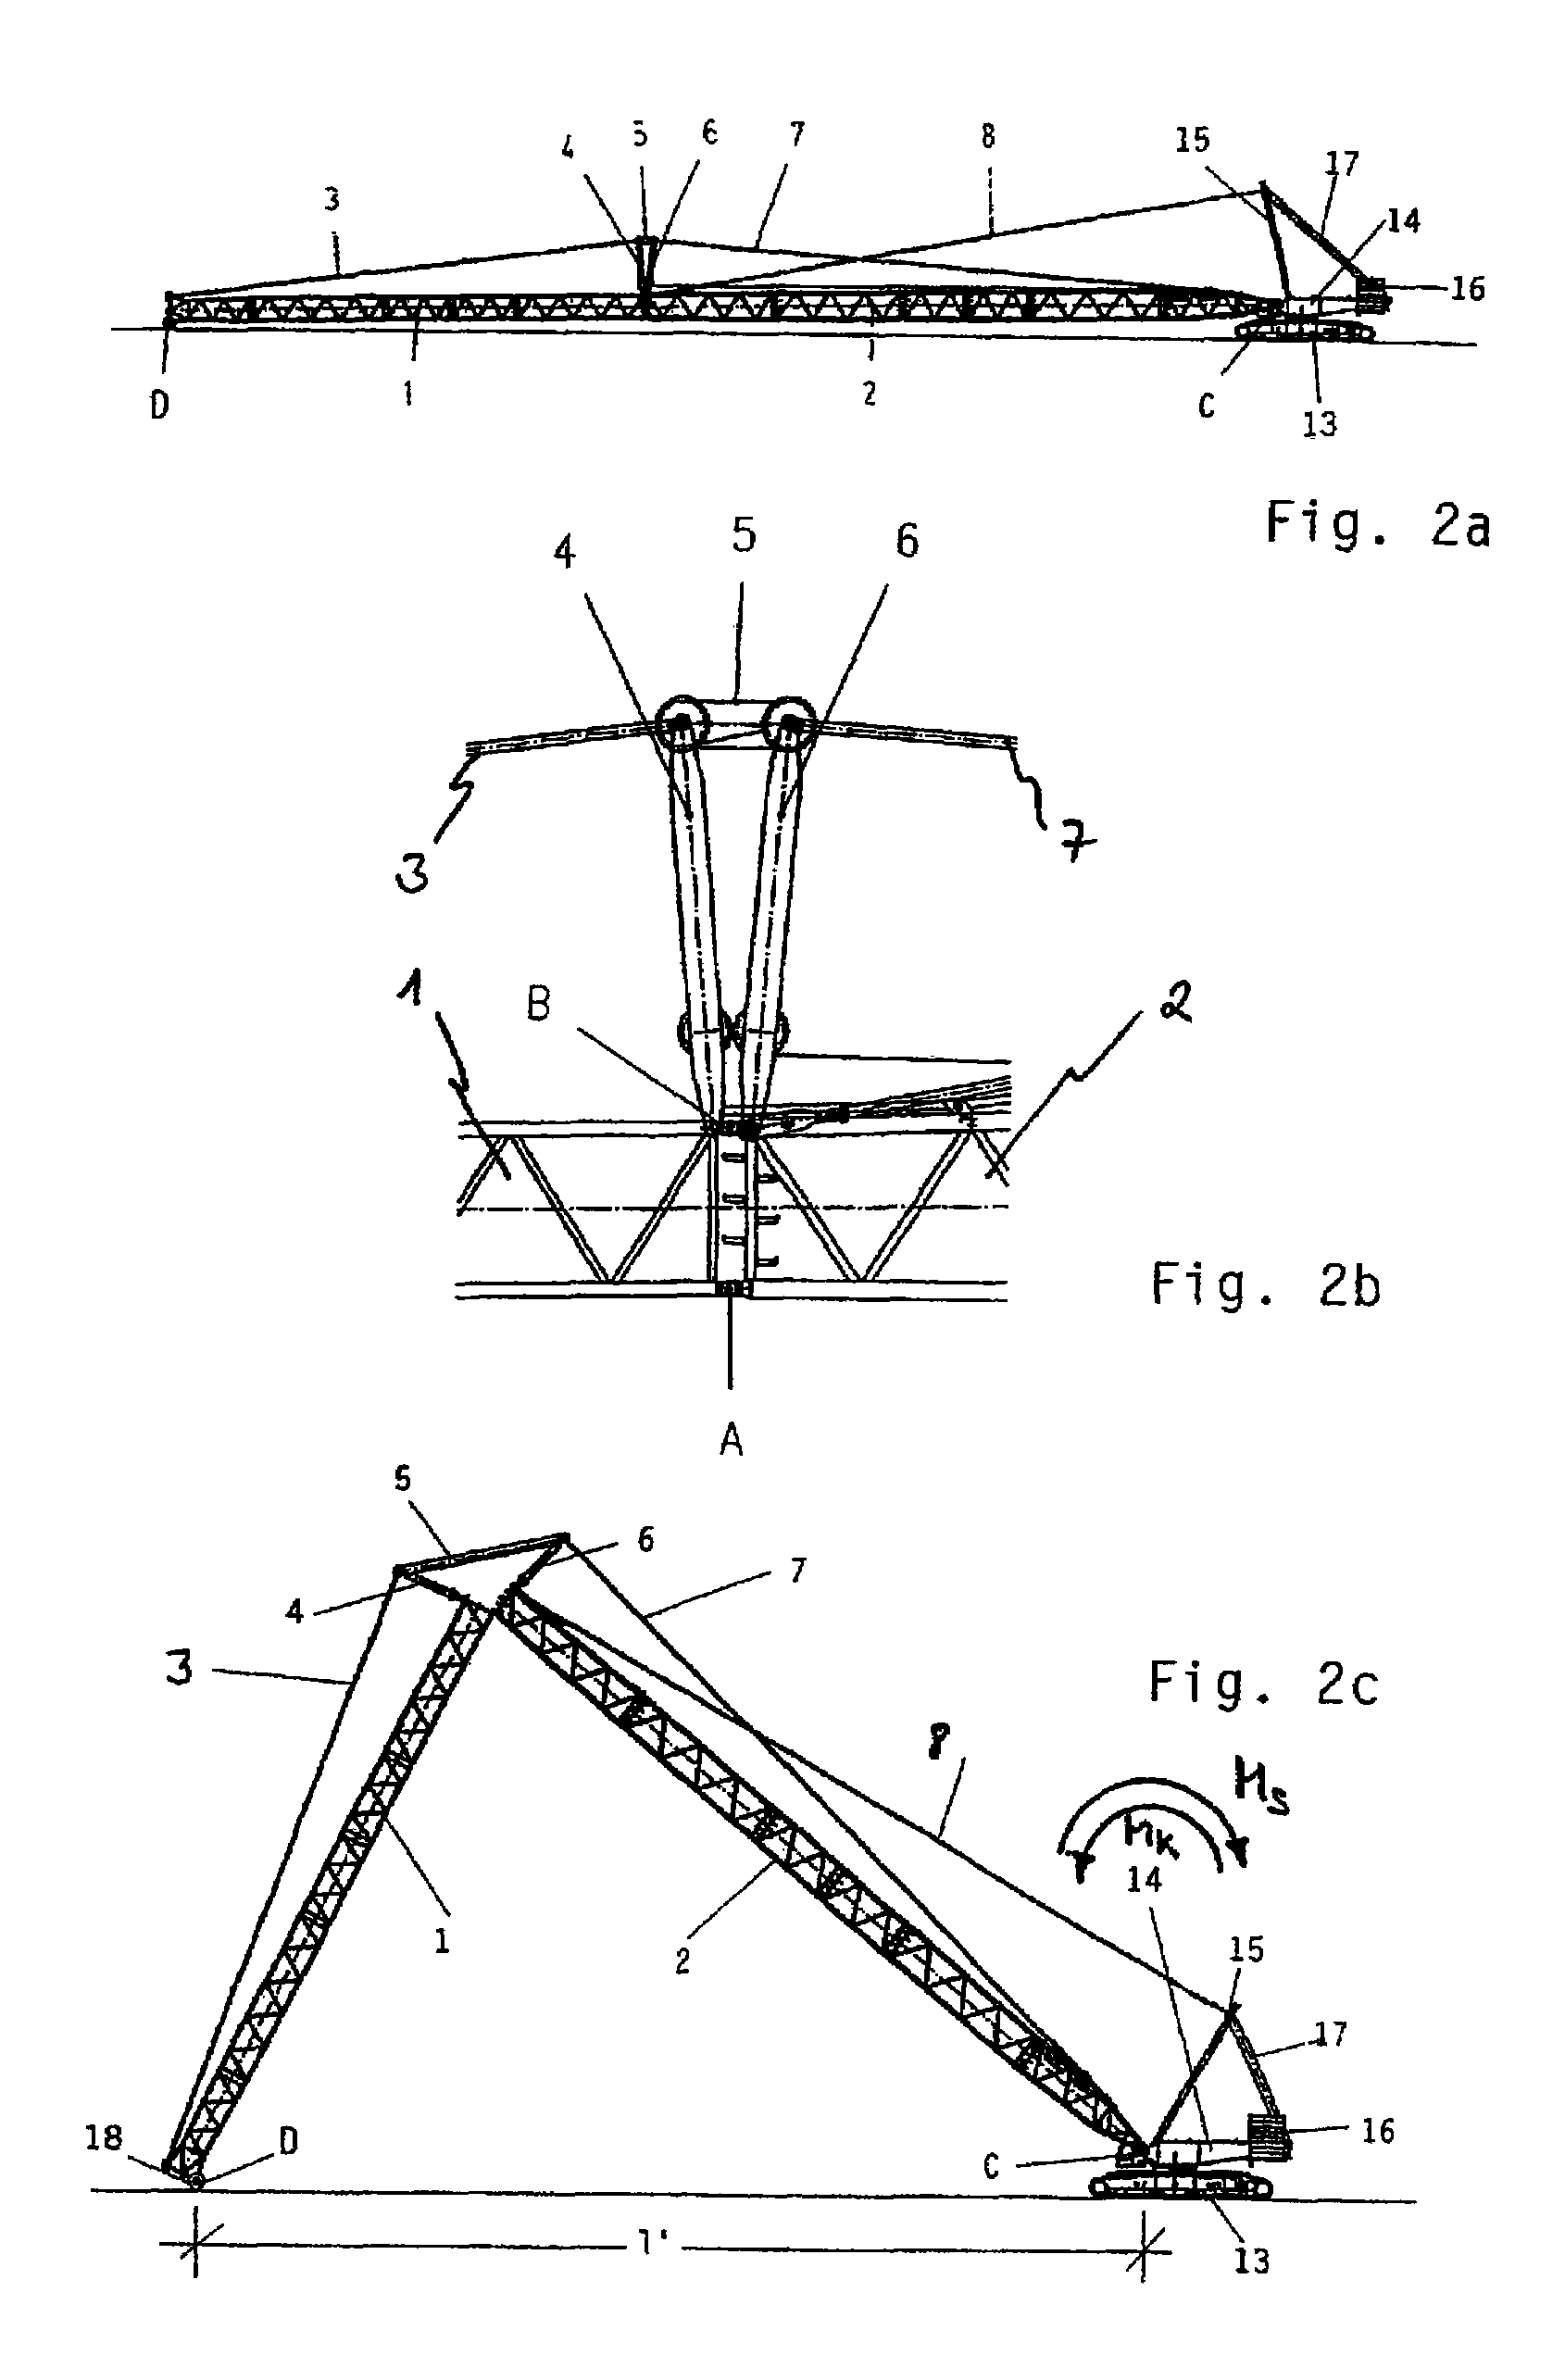 Method for erecting an at least two-piece main boom for a lattice-boom crane and lattice-boom crane built accordingly